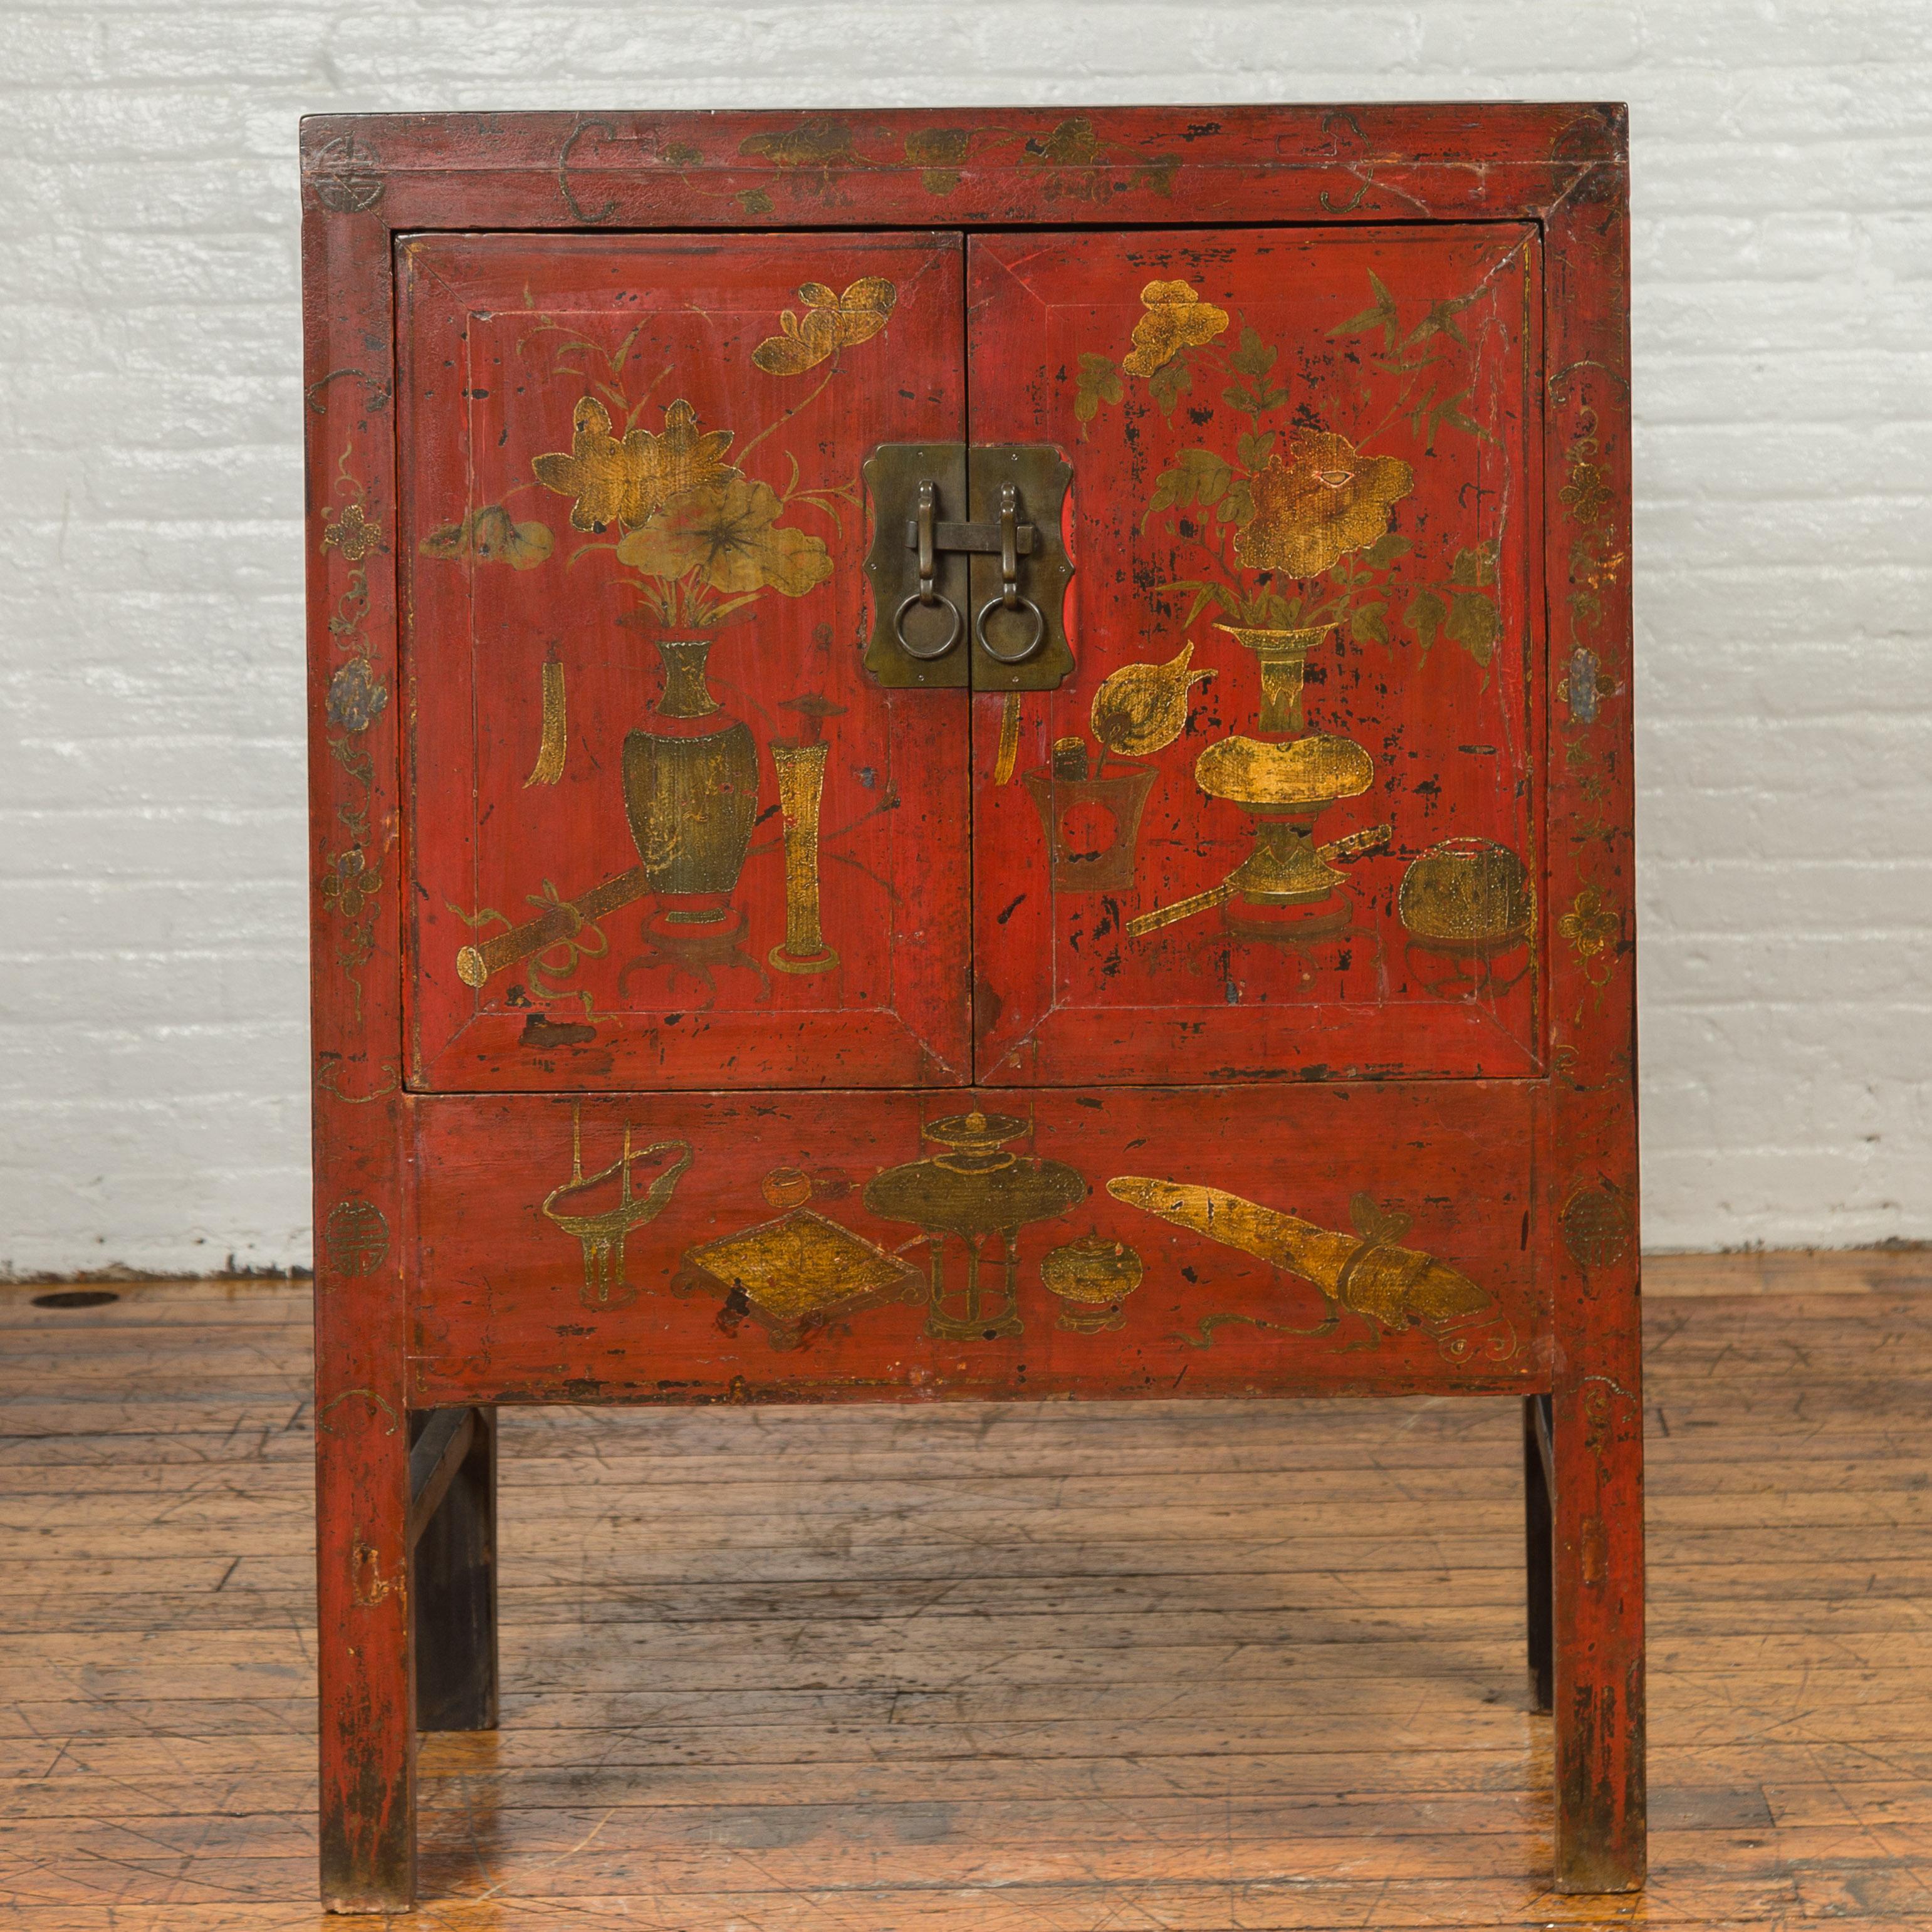 An antique Chinese red lacquered armoire from the 19th century with distressed gold floral motifs. Presenting a linear silhouette, this Chinese cabinet features a red lacquered façade delicately accented with distressed gold vases with bouquets of